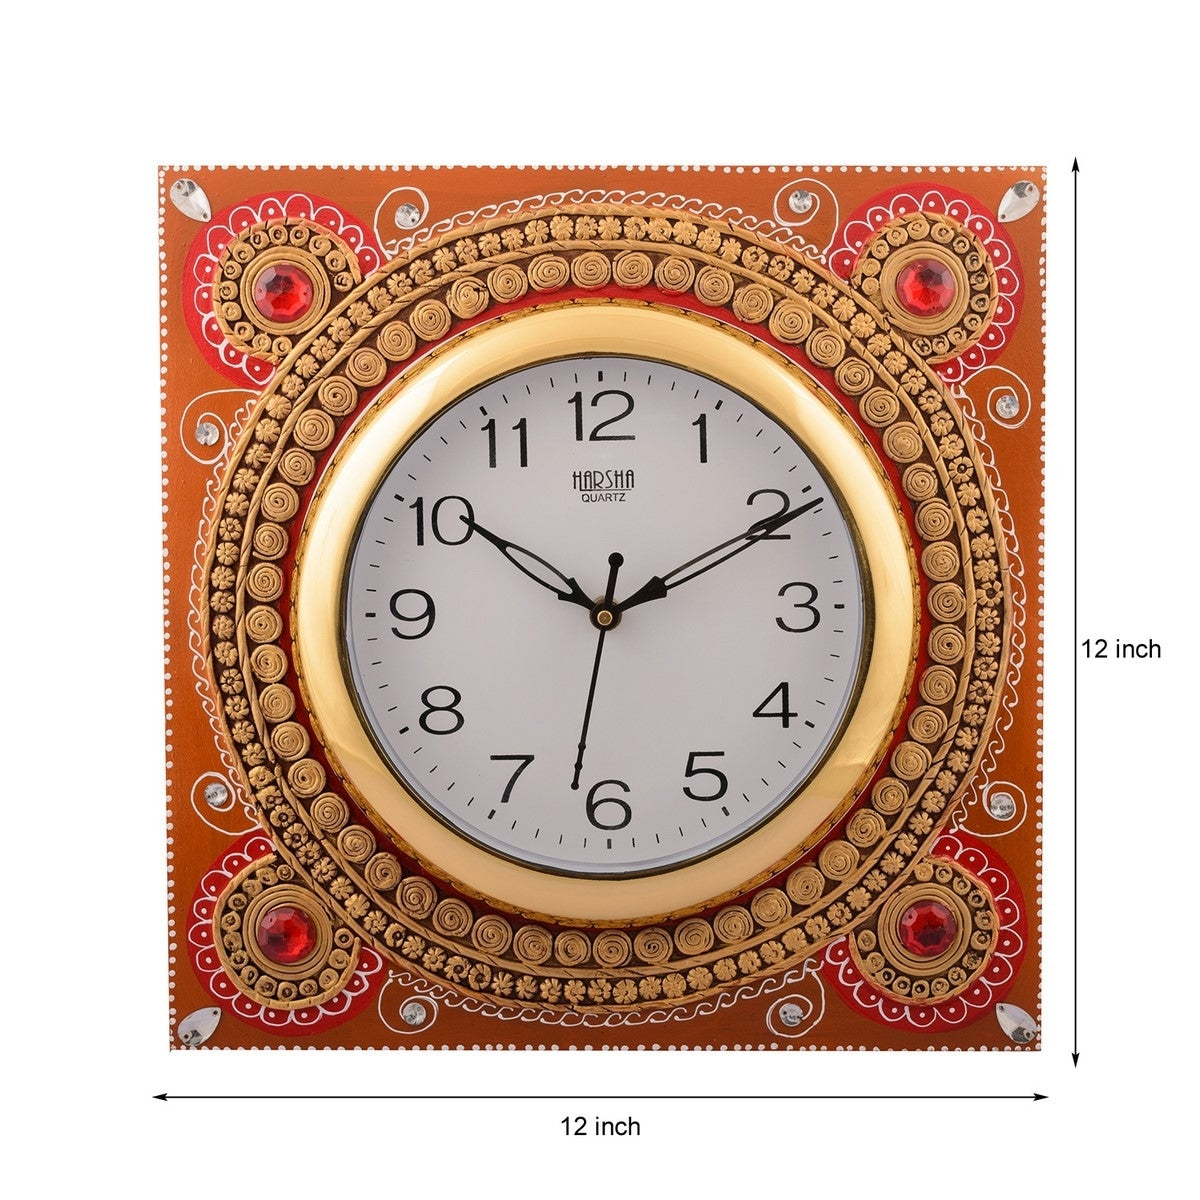 Dazzling Artistic Handcrafted Square Shape Papier Mache Wooden Wall Clock 2